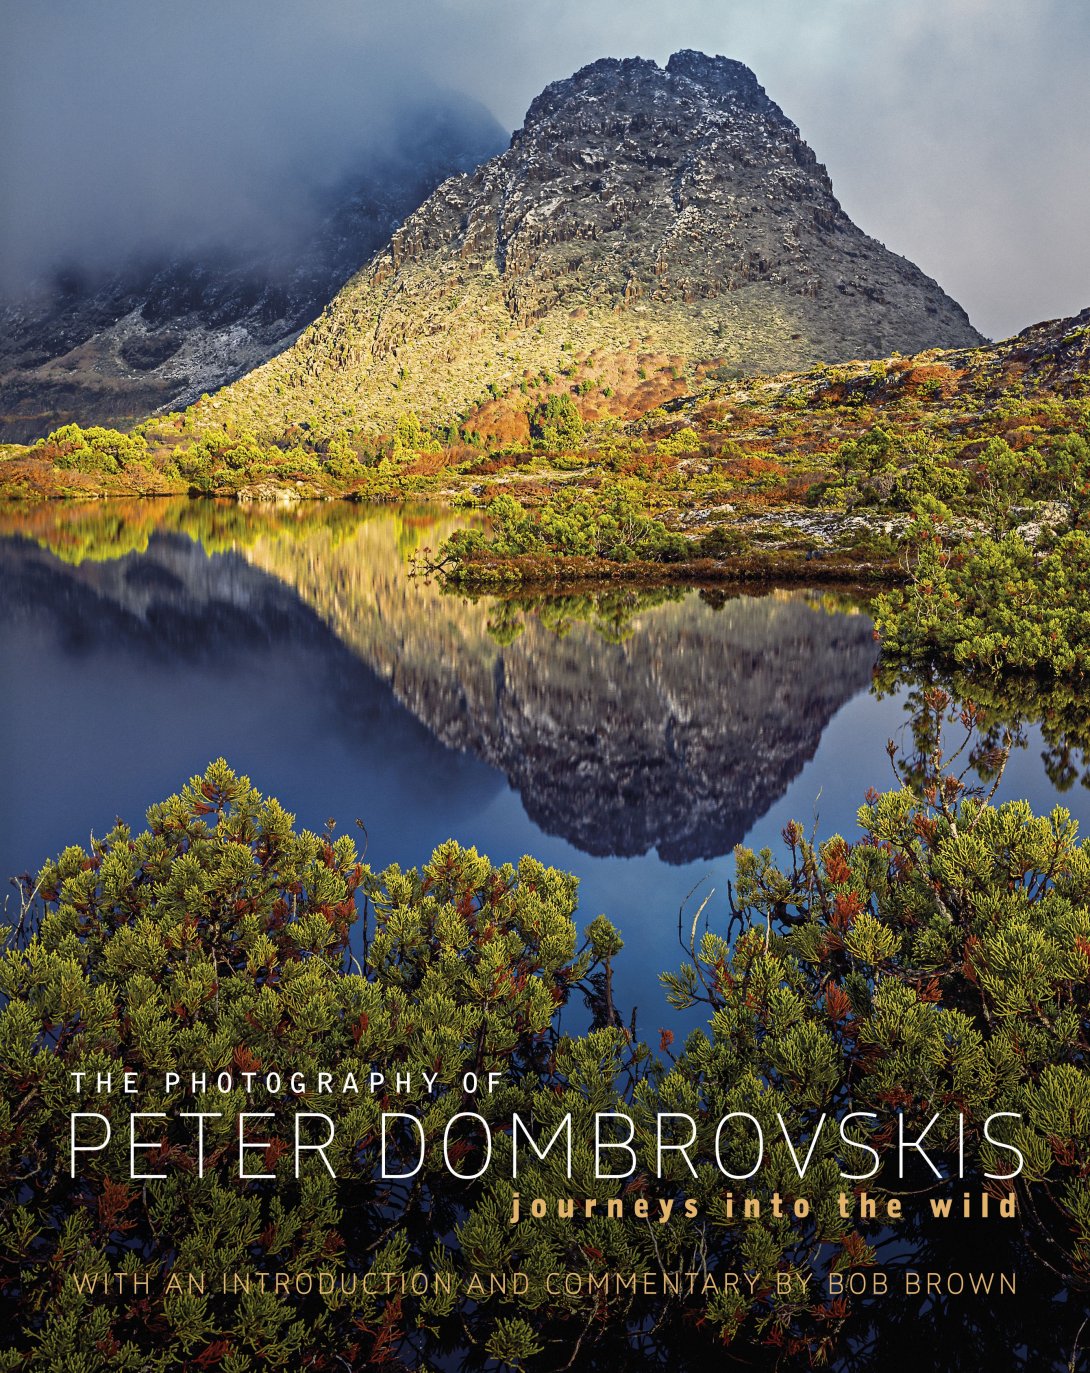 The Photography of Peter Dombrovskis, Journeys Into the Wild book cover. An image of a mountain reflected into still water with bushes at the base. 